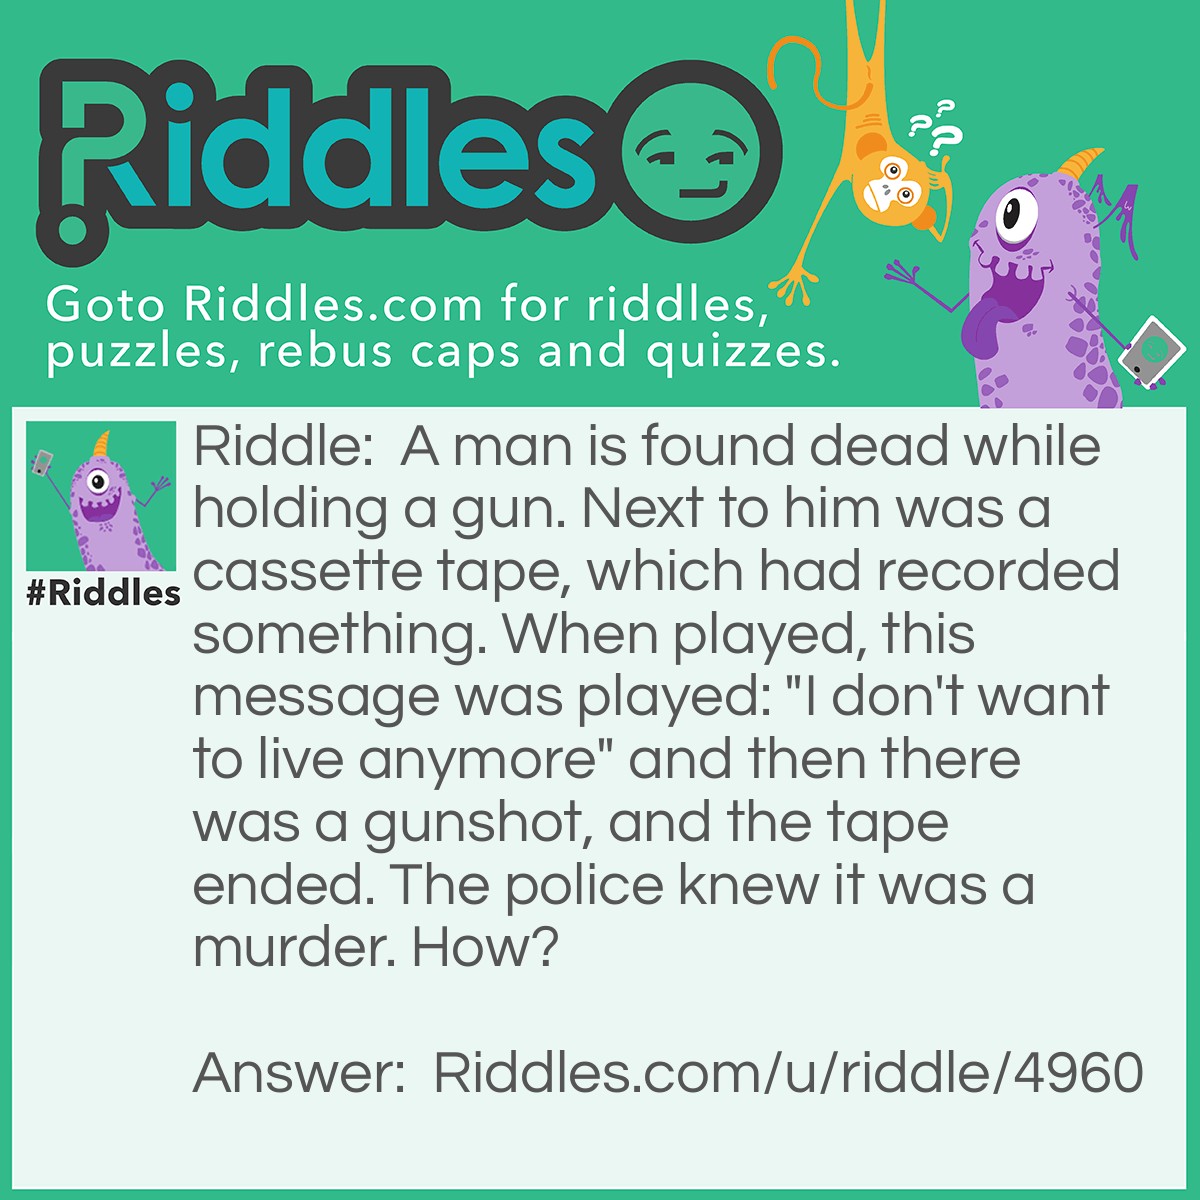 Riddle: A man is found dead while holding a gun. Next to him was a cassette tape, which had recorded something. When played, this message was played: "I don't want to live anymore" and then there was a gunshot, and the tape ended. The police knew it was a murder. How? Answer: Because to play the cassette tape, it has to be re-winded, and since there was a gunshot, the man was dead at the end of the recording, and couldn't rewind the tape!